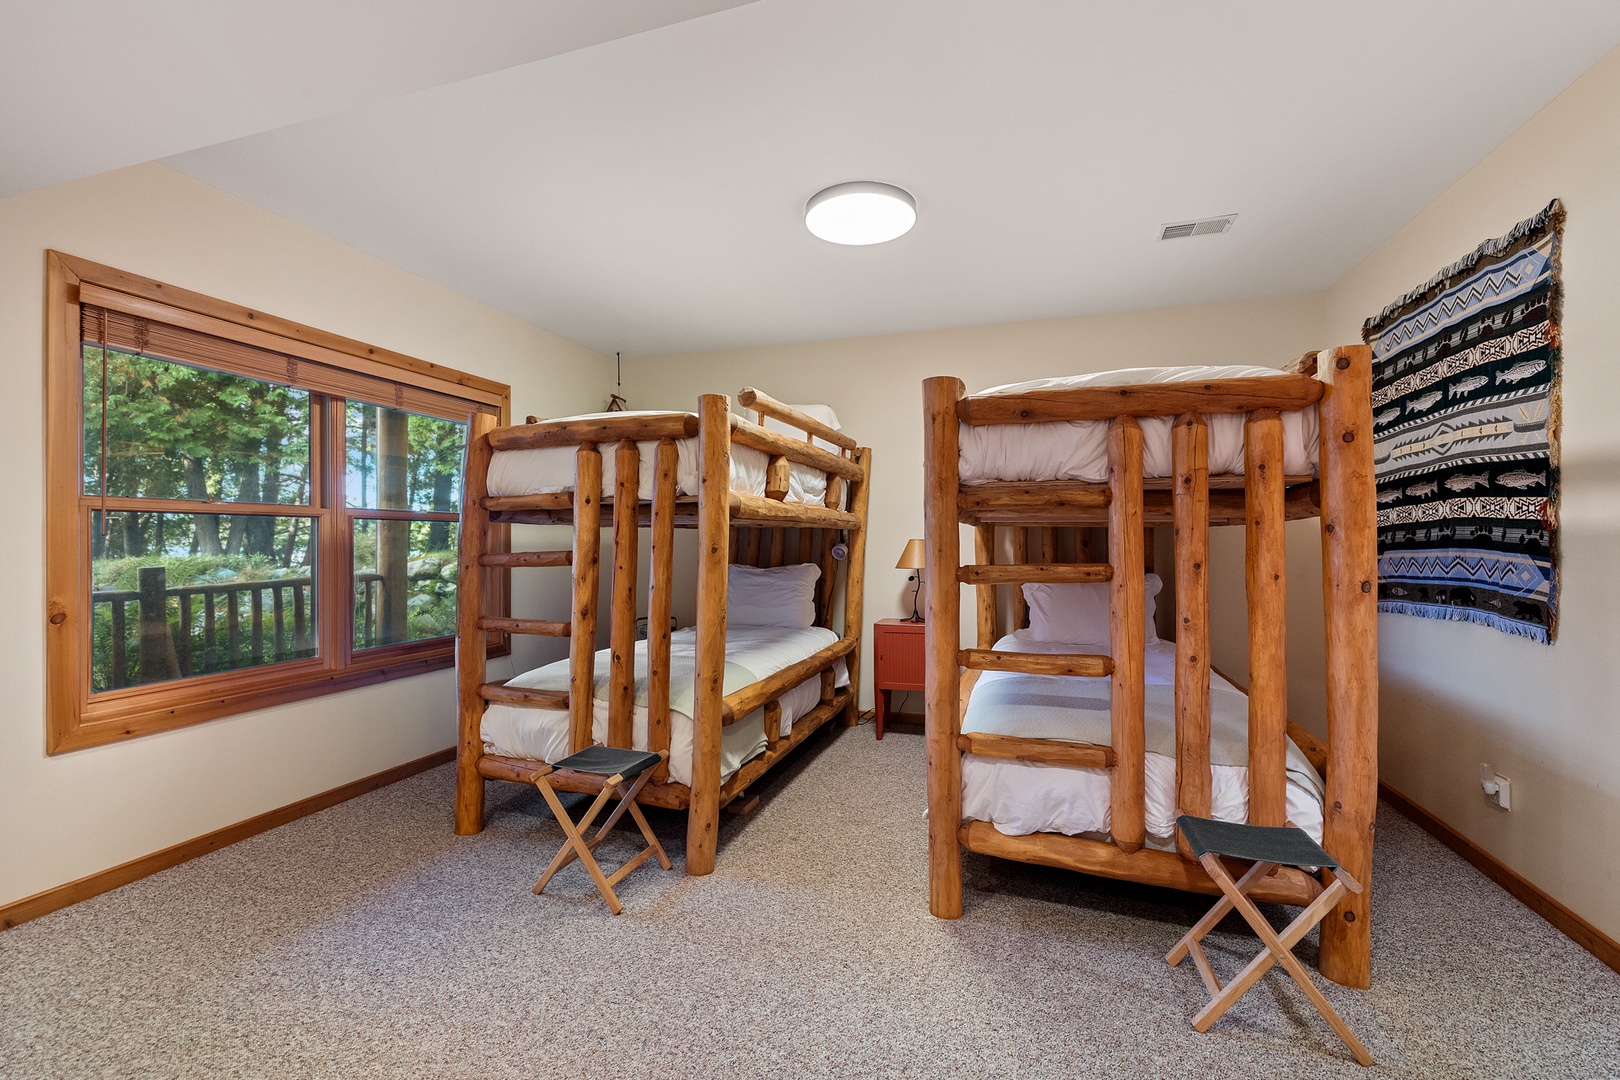 Welcome to the cozy bunkroom, perfect for kids or young adults to share.